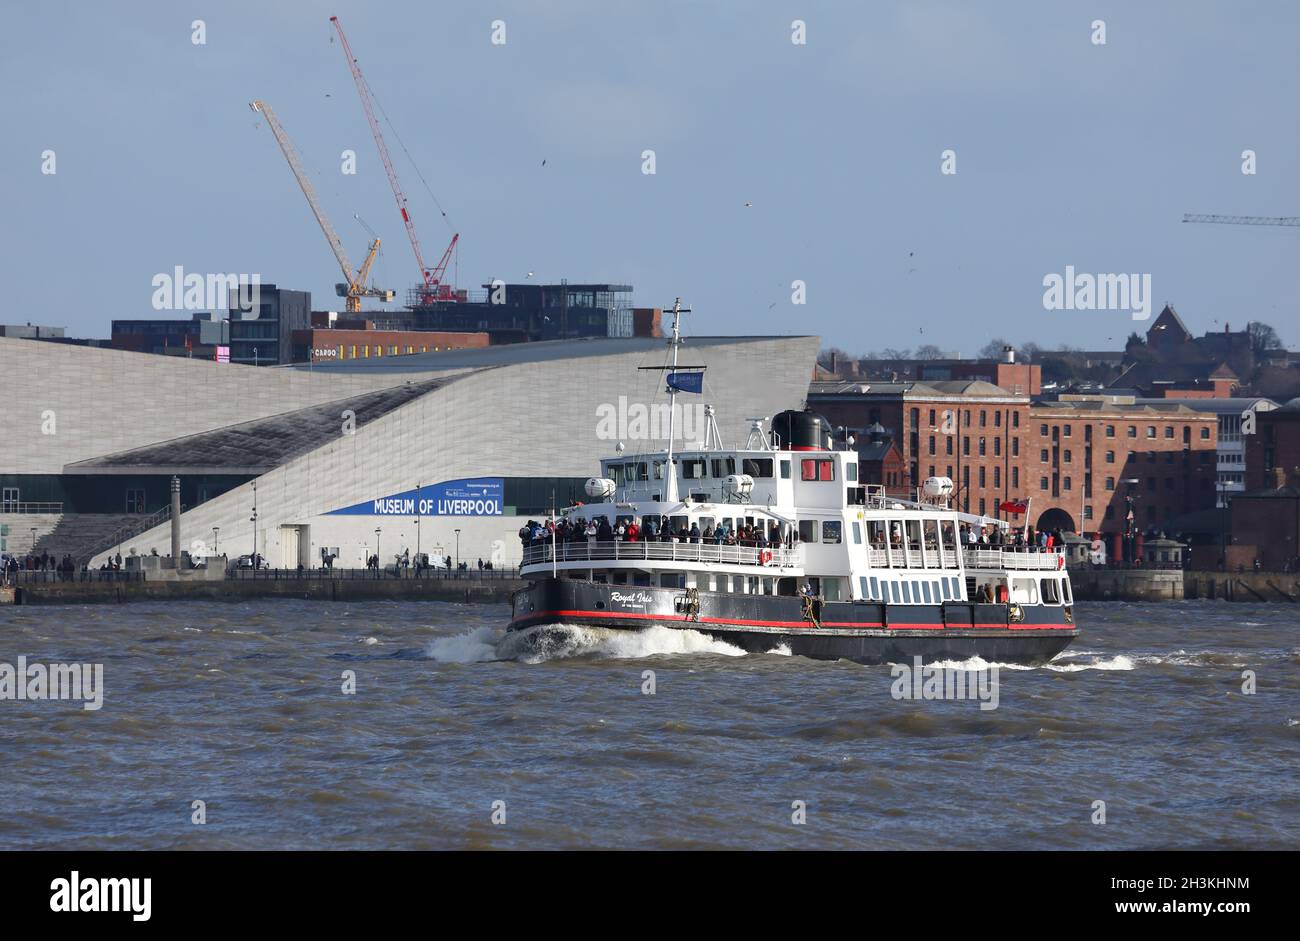 River Mersey ferry boat and passengers, Liverpool, UK, March, 2020. Stock Photo